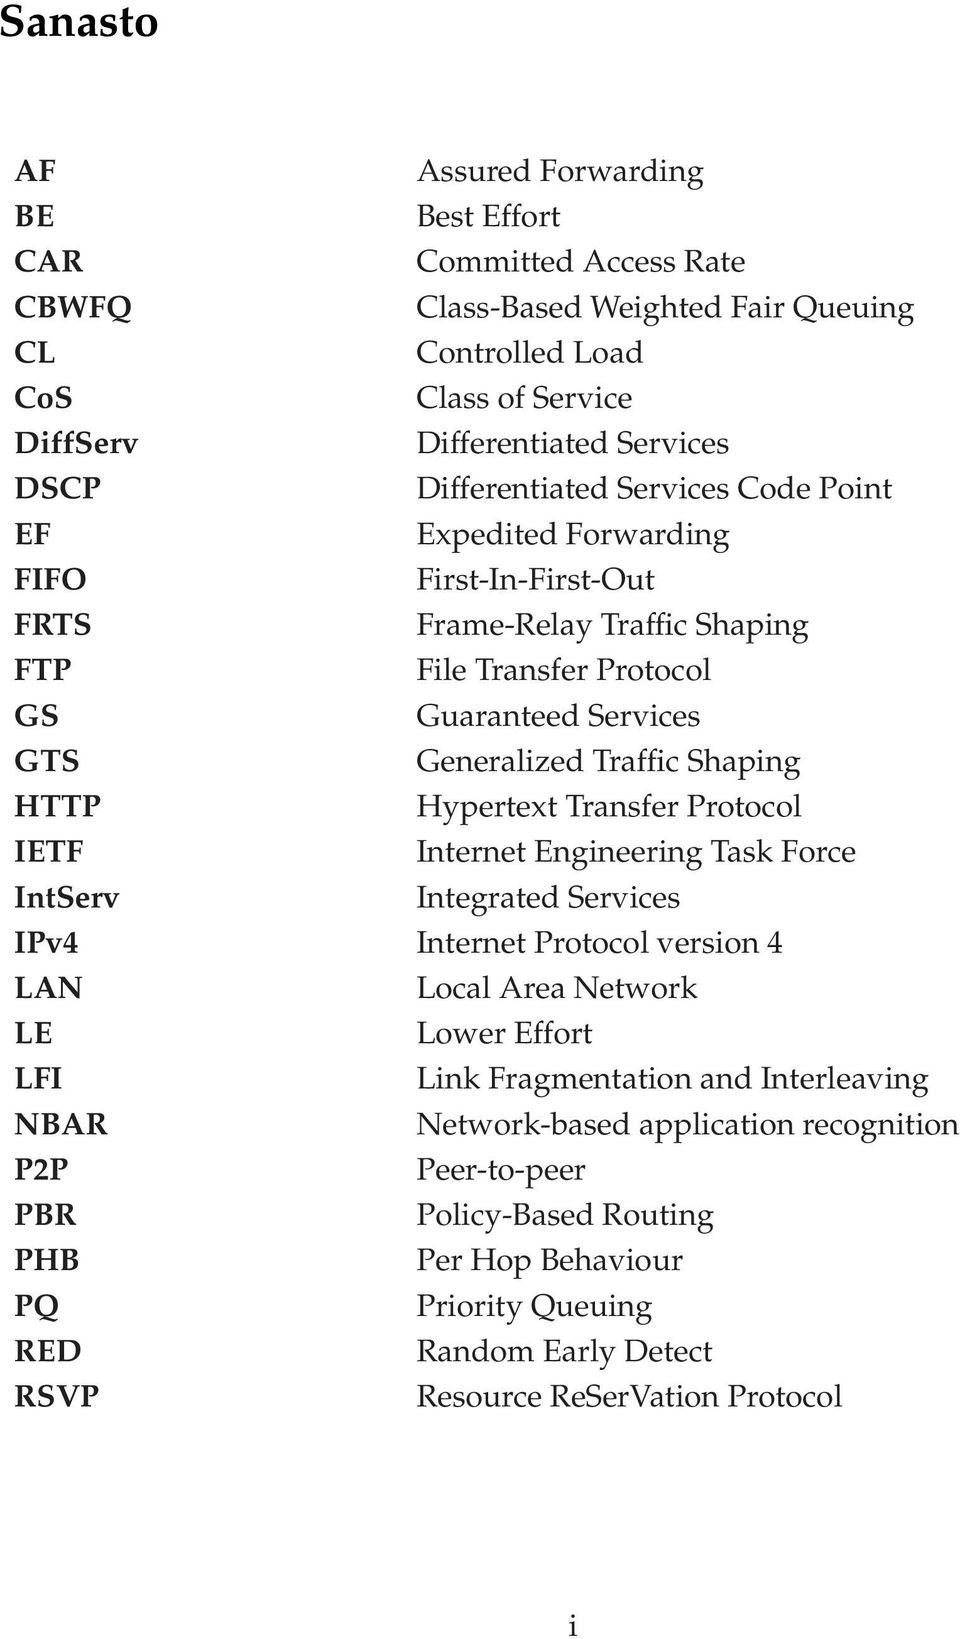 Shaping HTTP Hypertext Transfer Protocol IETF Internet Engineering Task Force IntServ Integrated Services IPv4 Internet Protocol version 4 LAN Local Area Network LE Lower Effort LFI Link